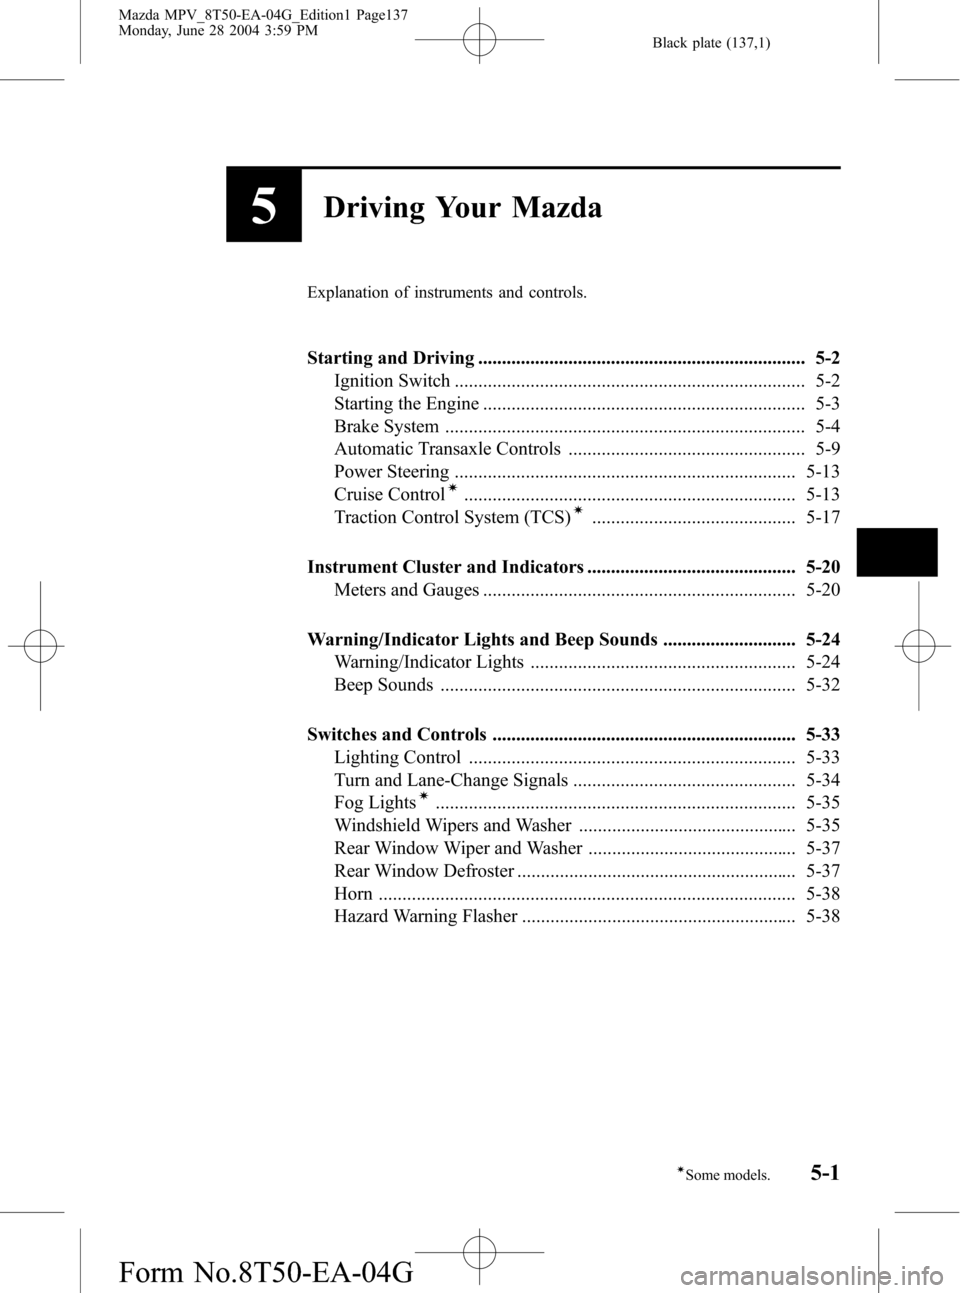 MAZDA MODEL MPV 2005  Owners Manual (in English) Black plate (137,1)
5Driving Your Mazda
Explanation of instruments and controls.
Starting and Driving ..................................................................... 5-2
Ignition Switch ........